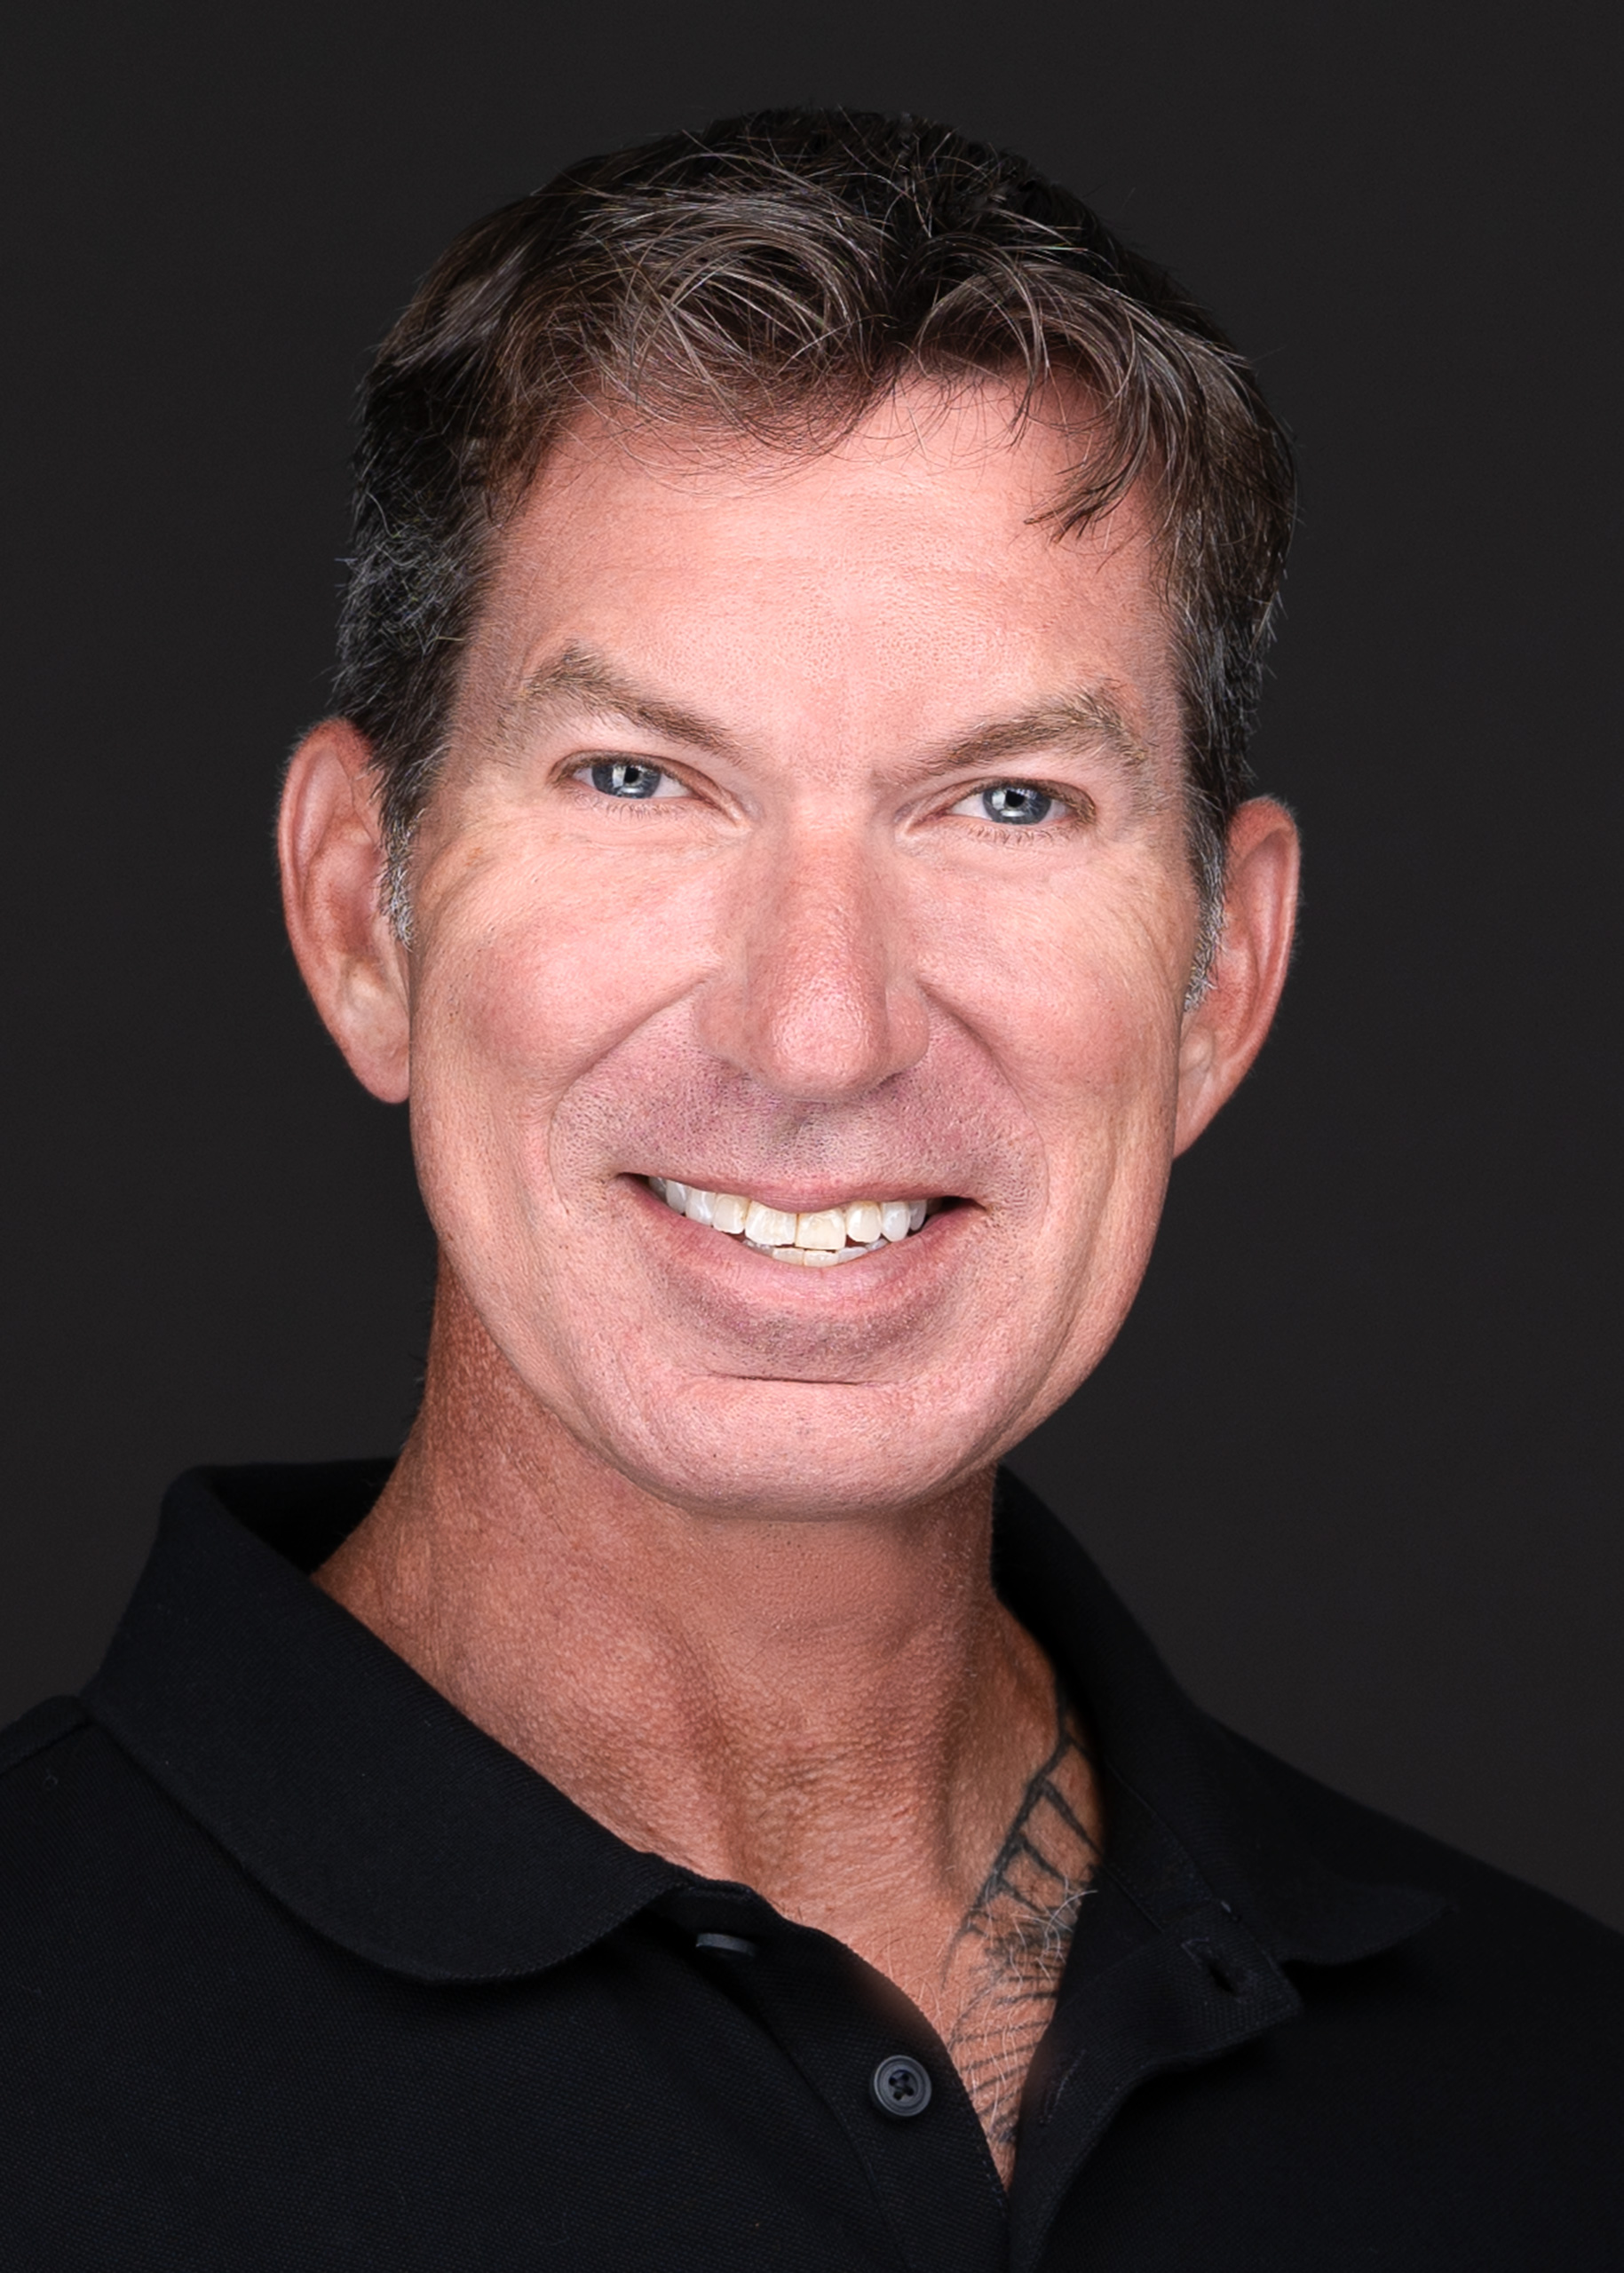 A man in a black shirt smiling for the camera during a business headshot session with professional photographer Sarah Anne Wilson Photography in Cary, North Carolina.